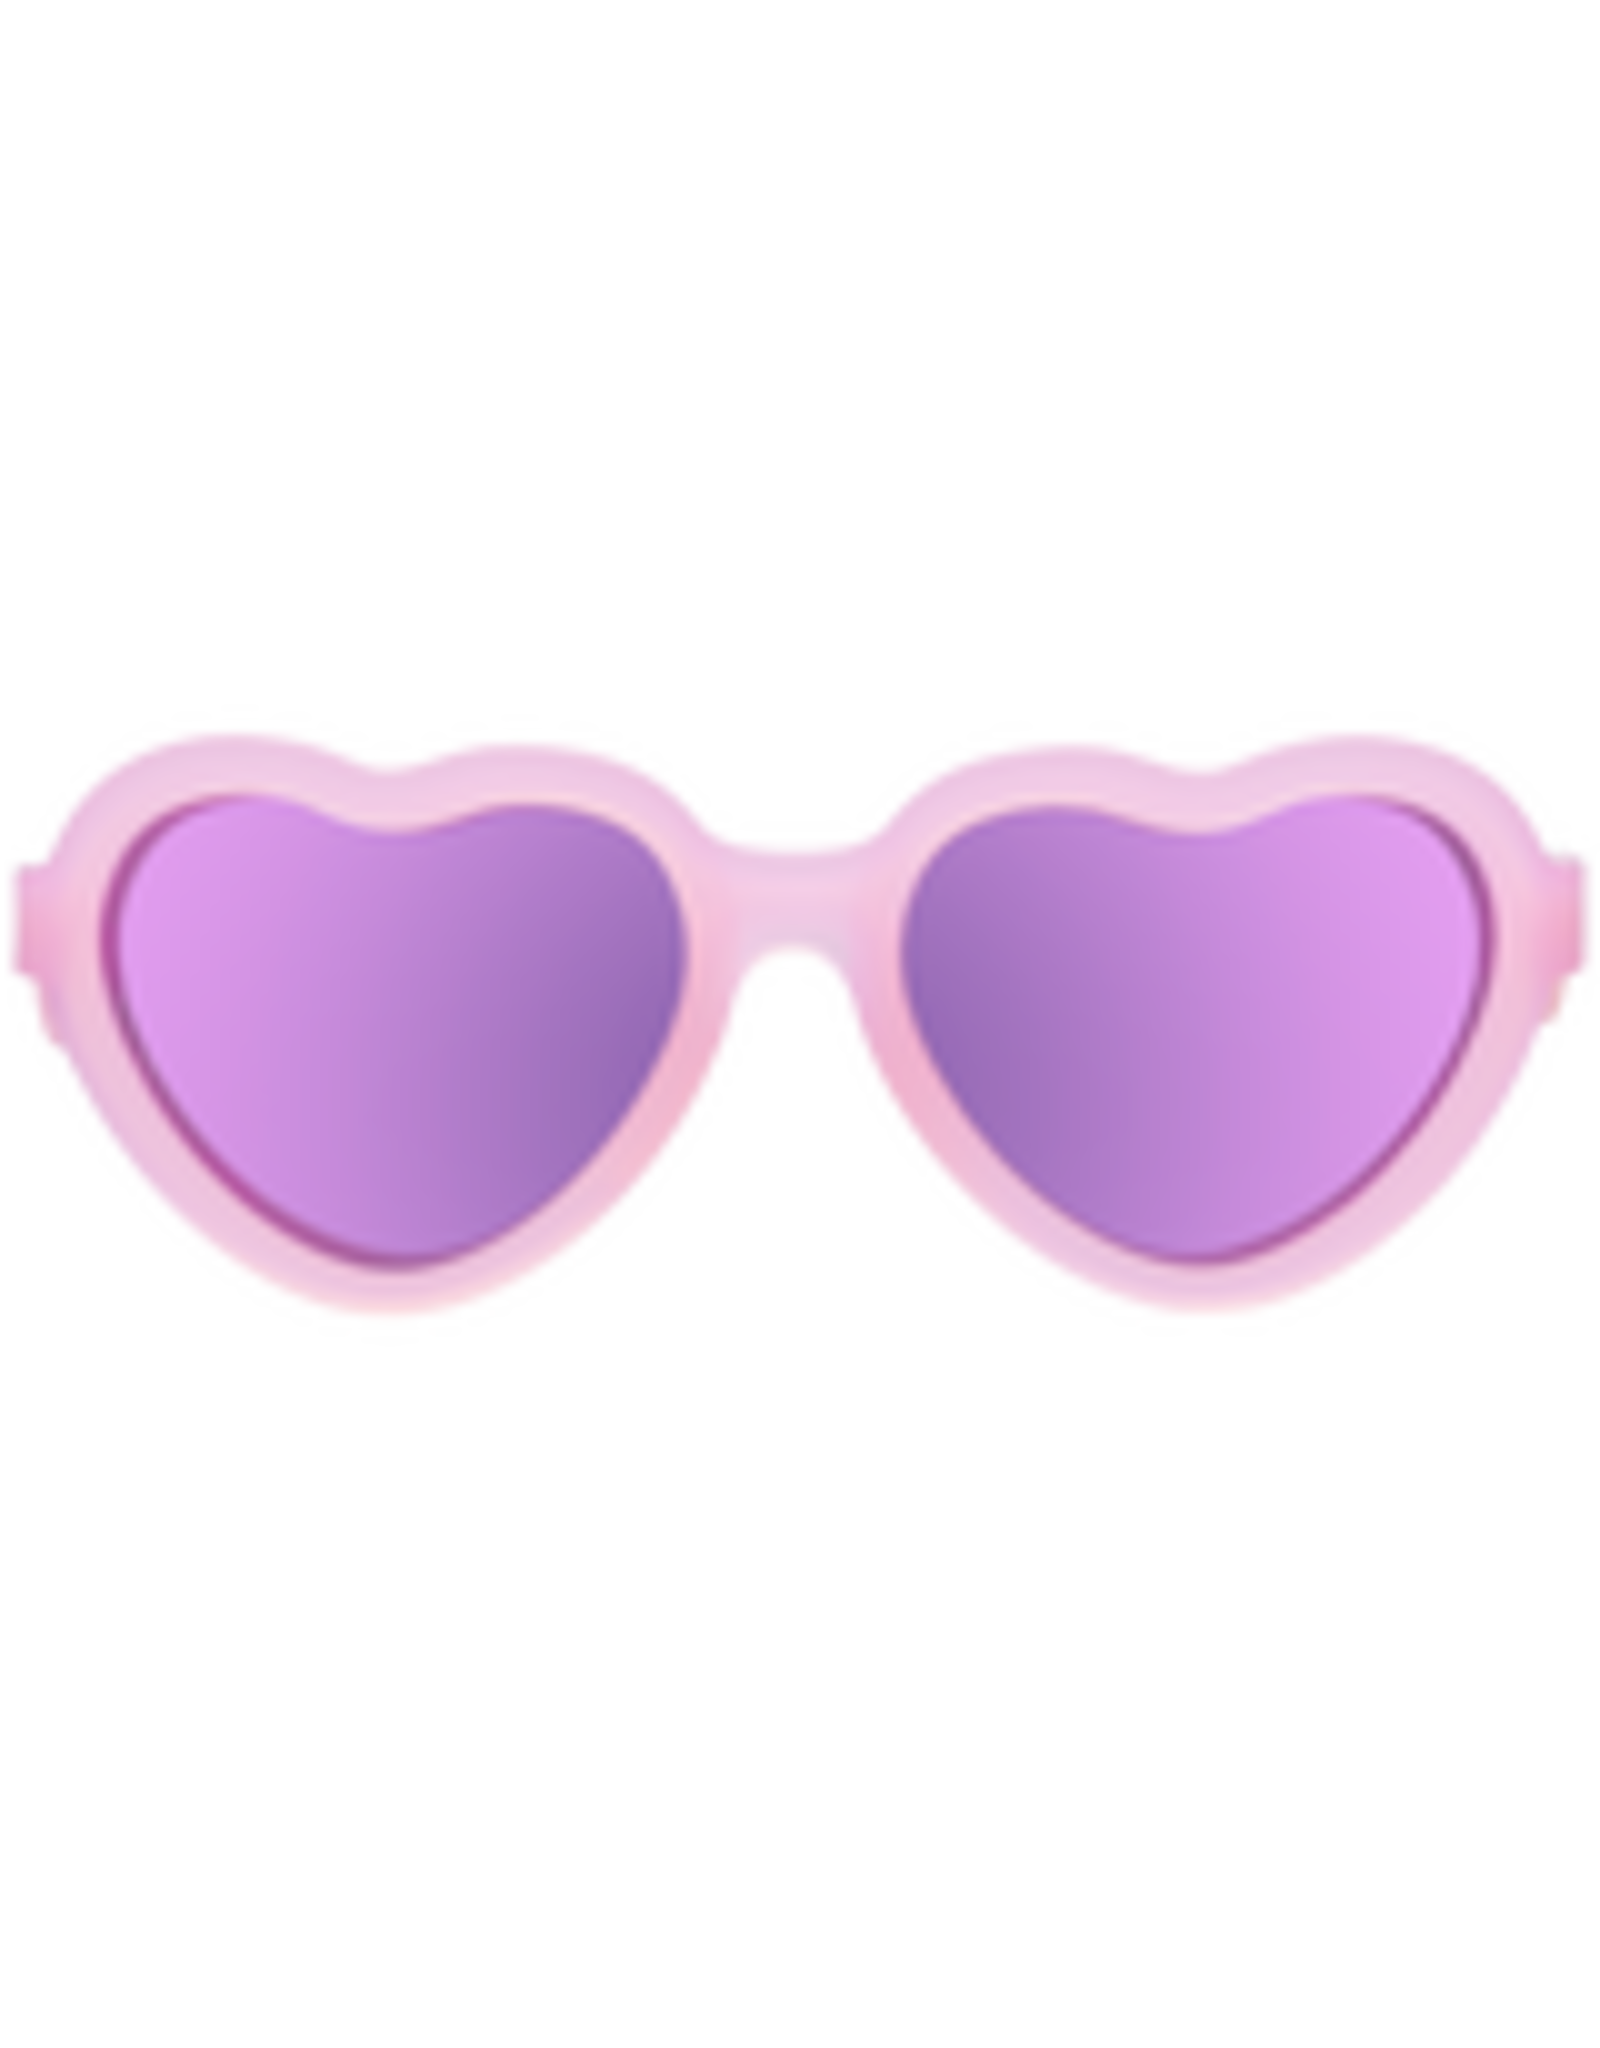 Babiators Polarized Heart: Frosted Pink with Purple Mirrored Lenses